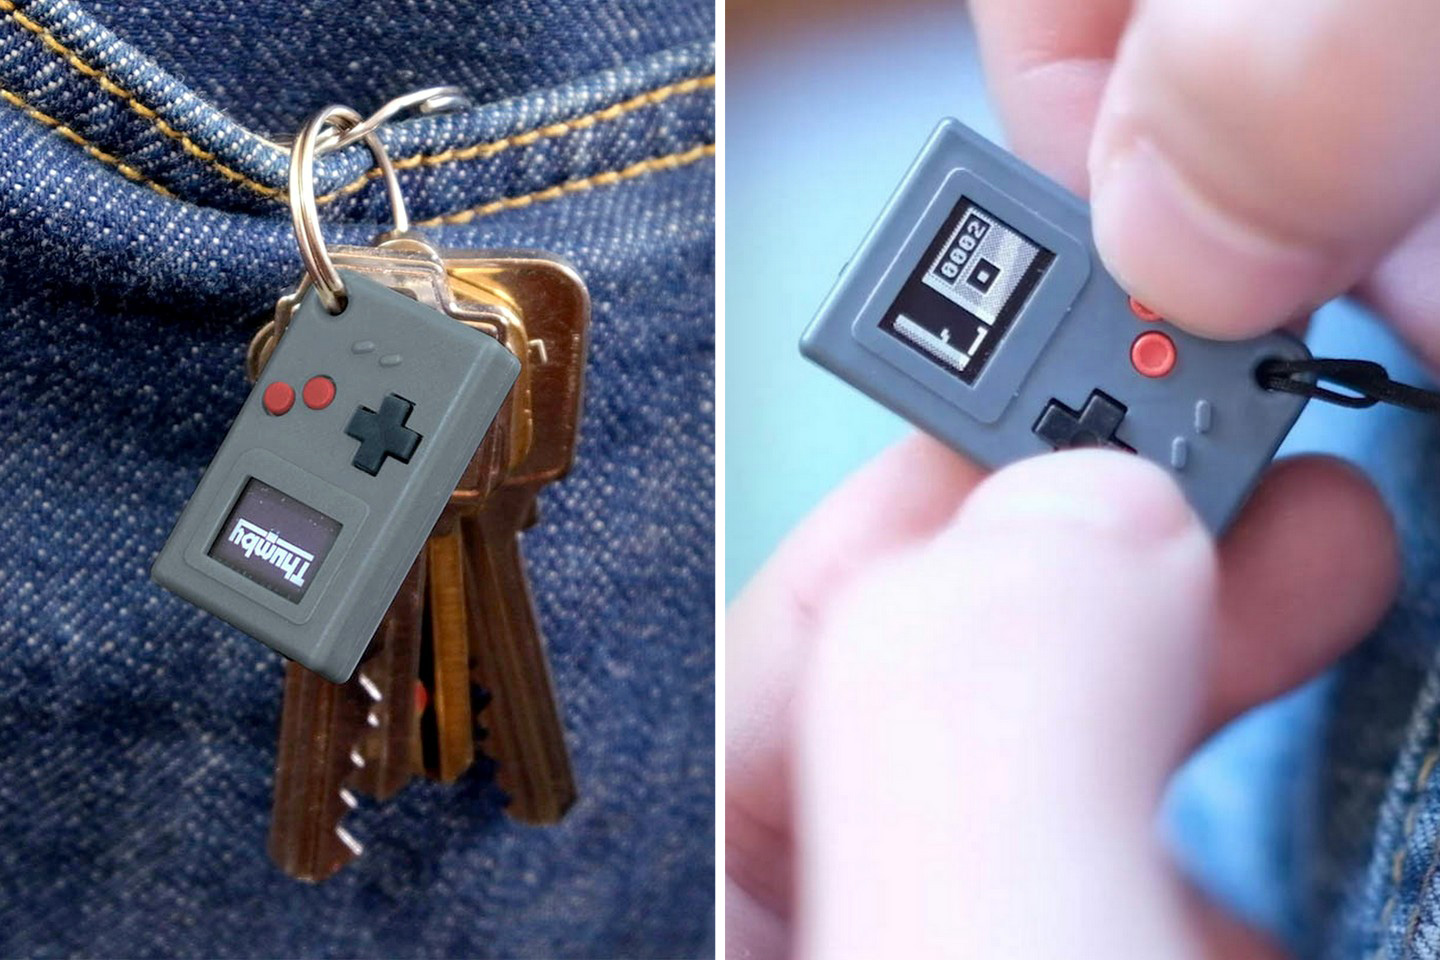 The 'World's Smallest Game Boy' is tiny enough to fit on your